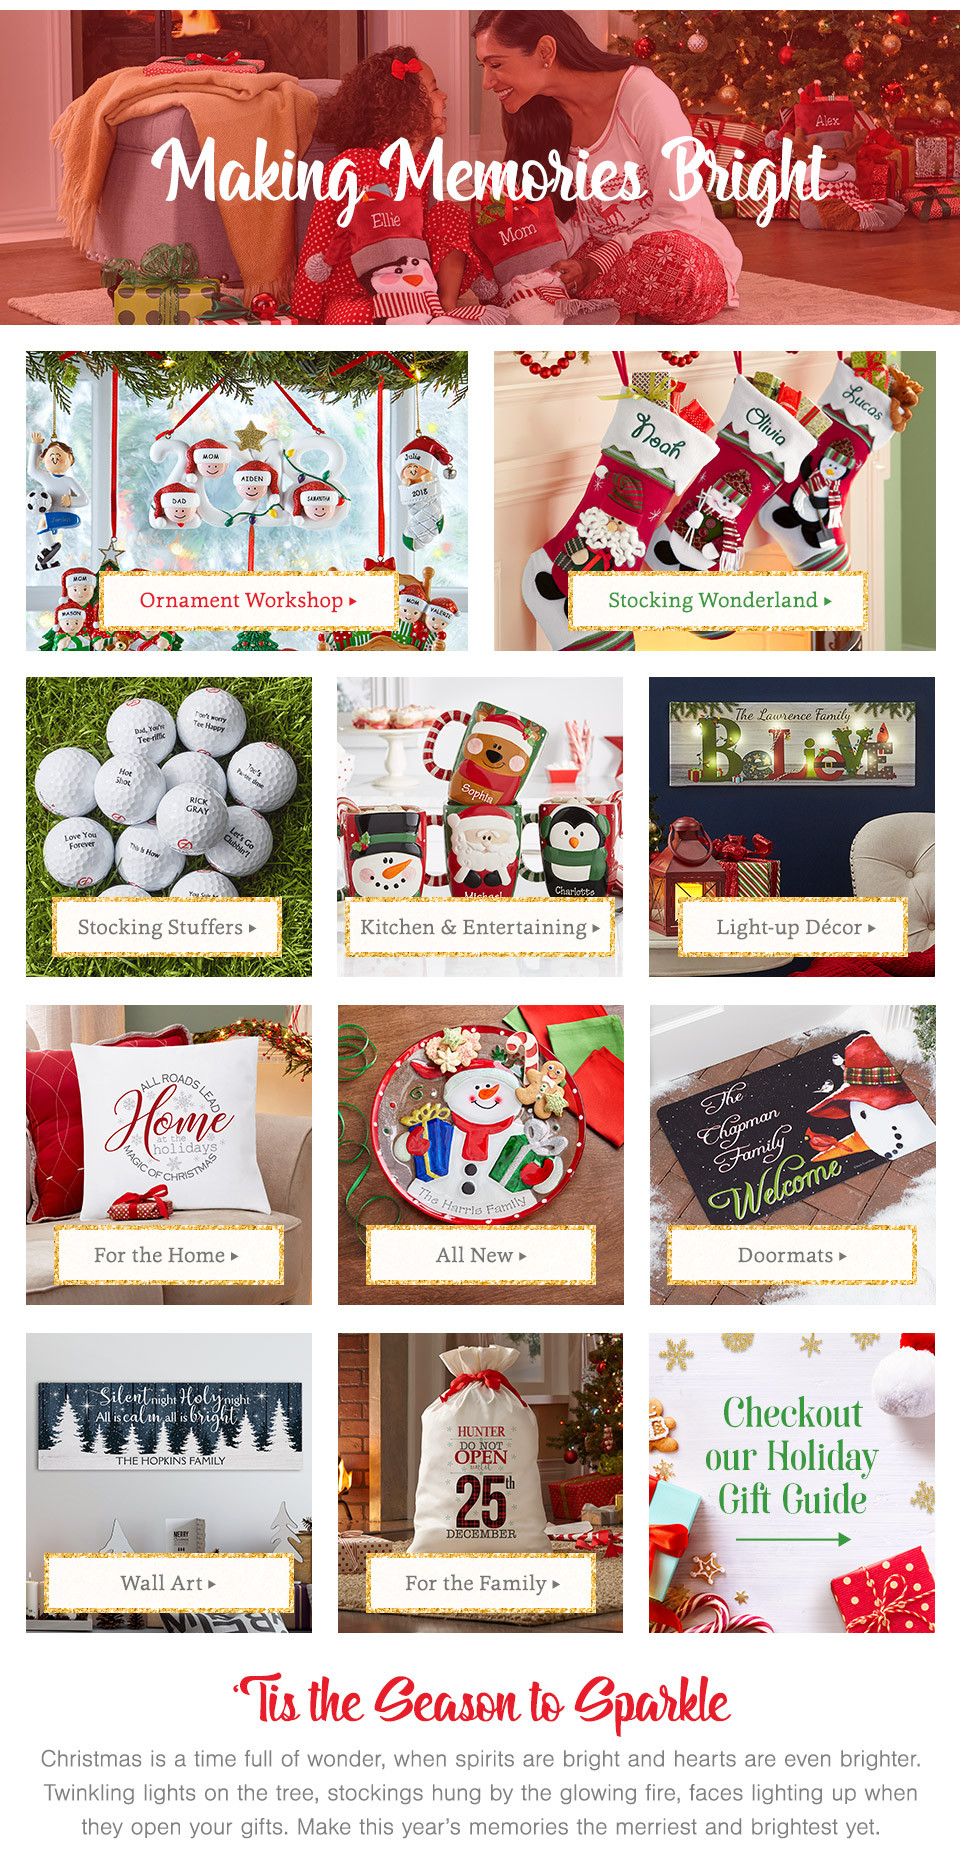 Uniques Christmas Gift Ideas
 2019 Personalized Christmas Gifts